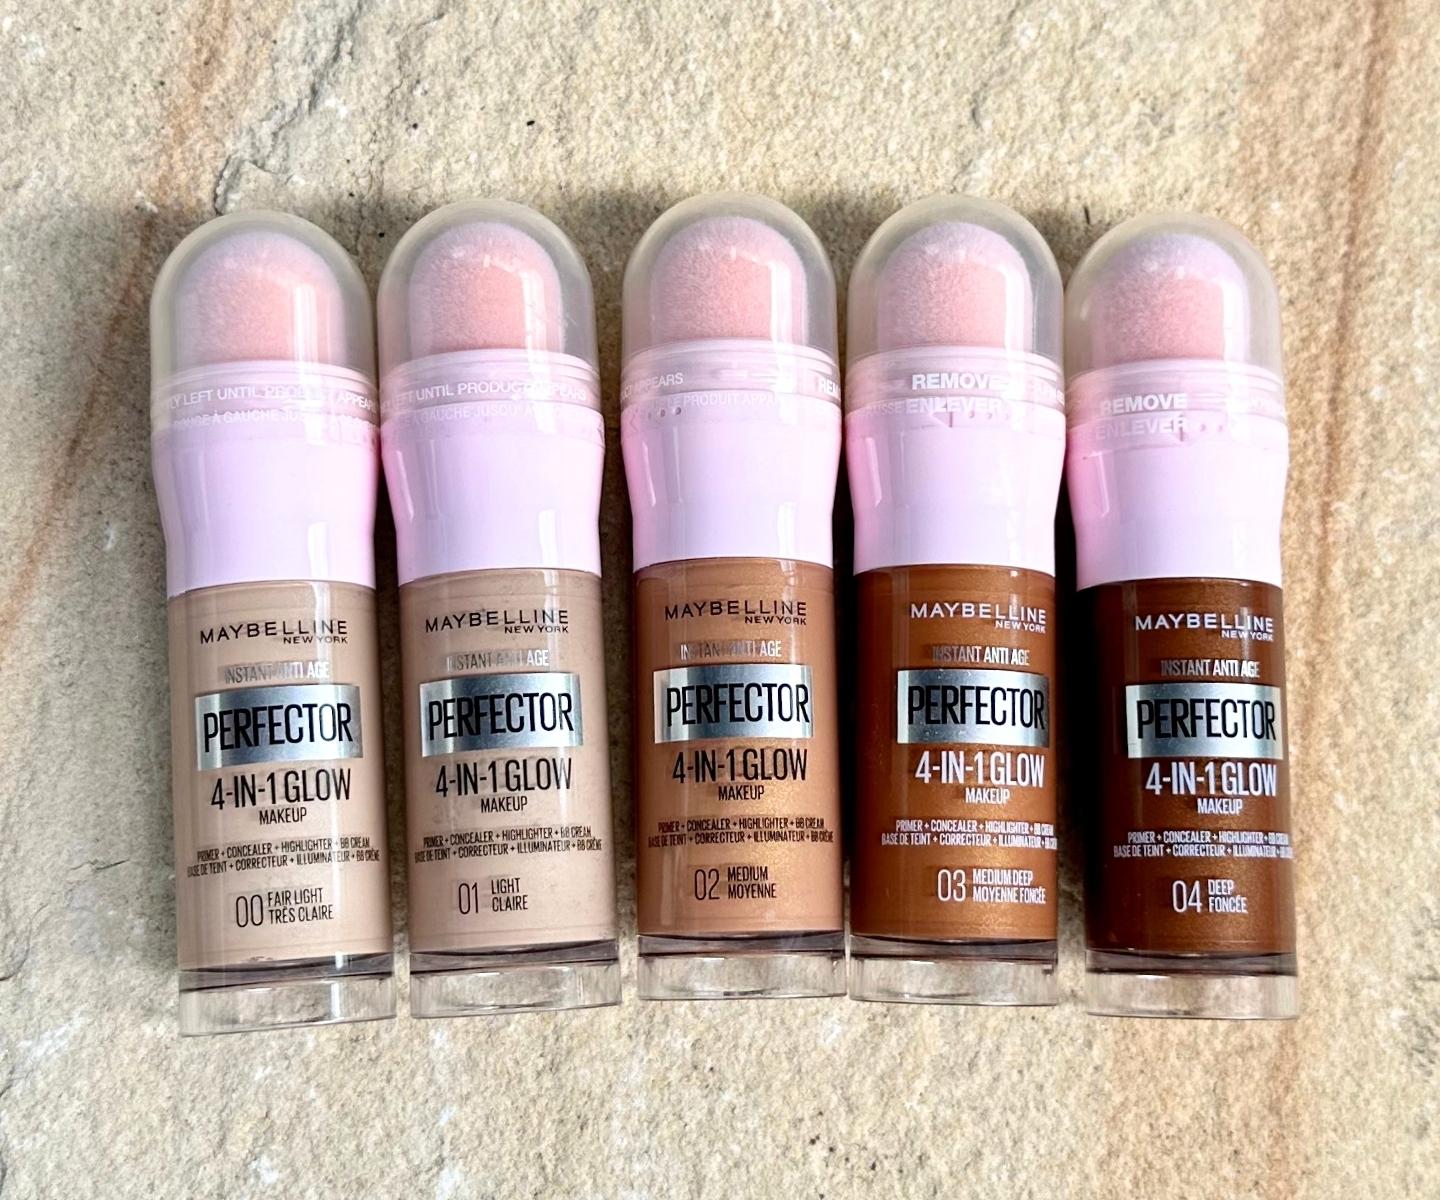 Maybelline Instant Perfector 4-in-1 Glow colour range